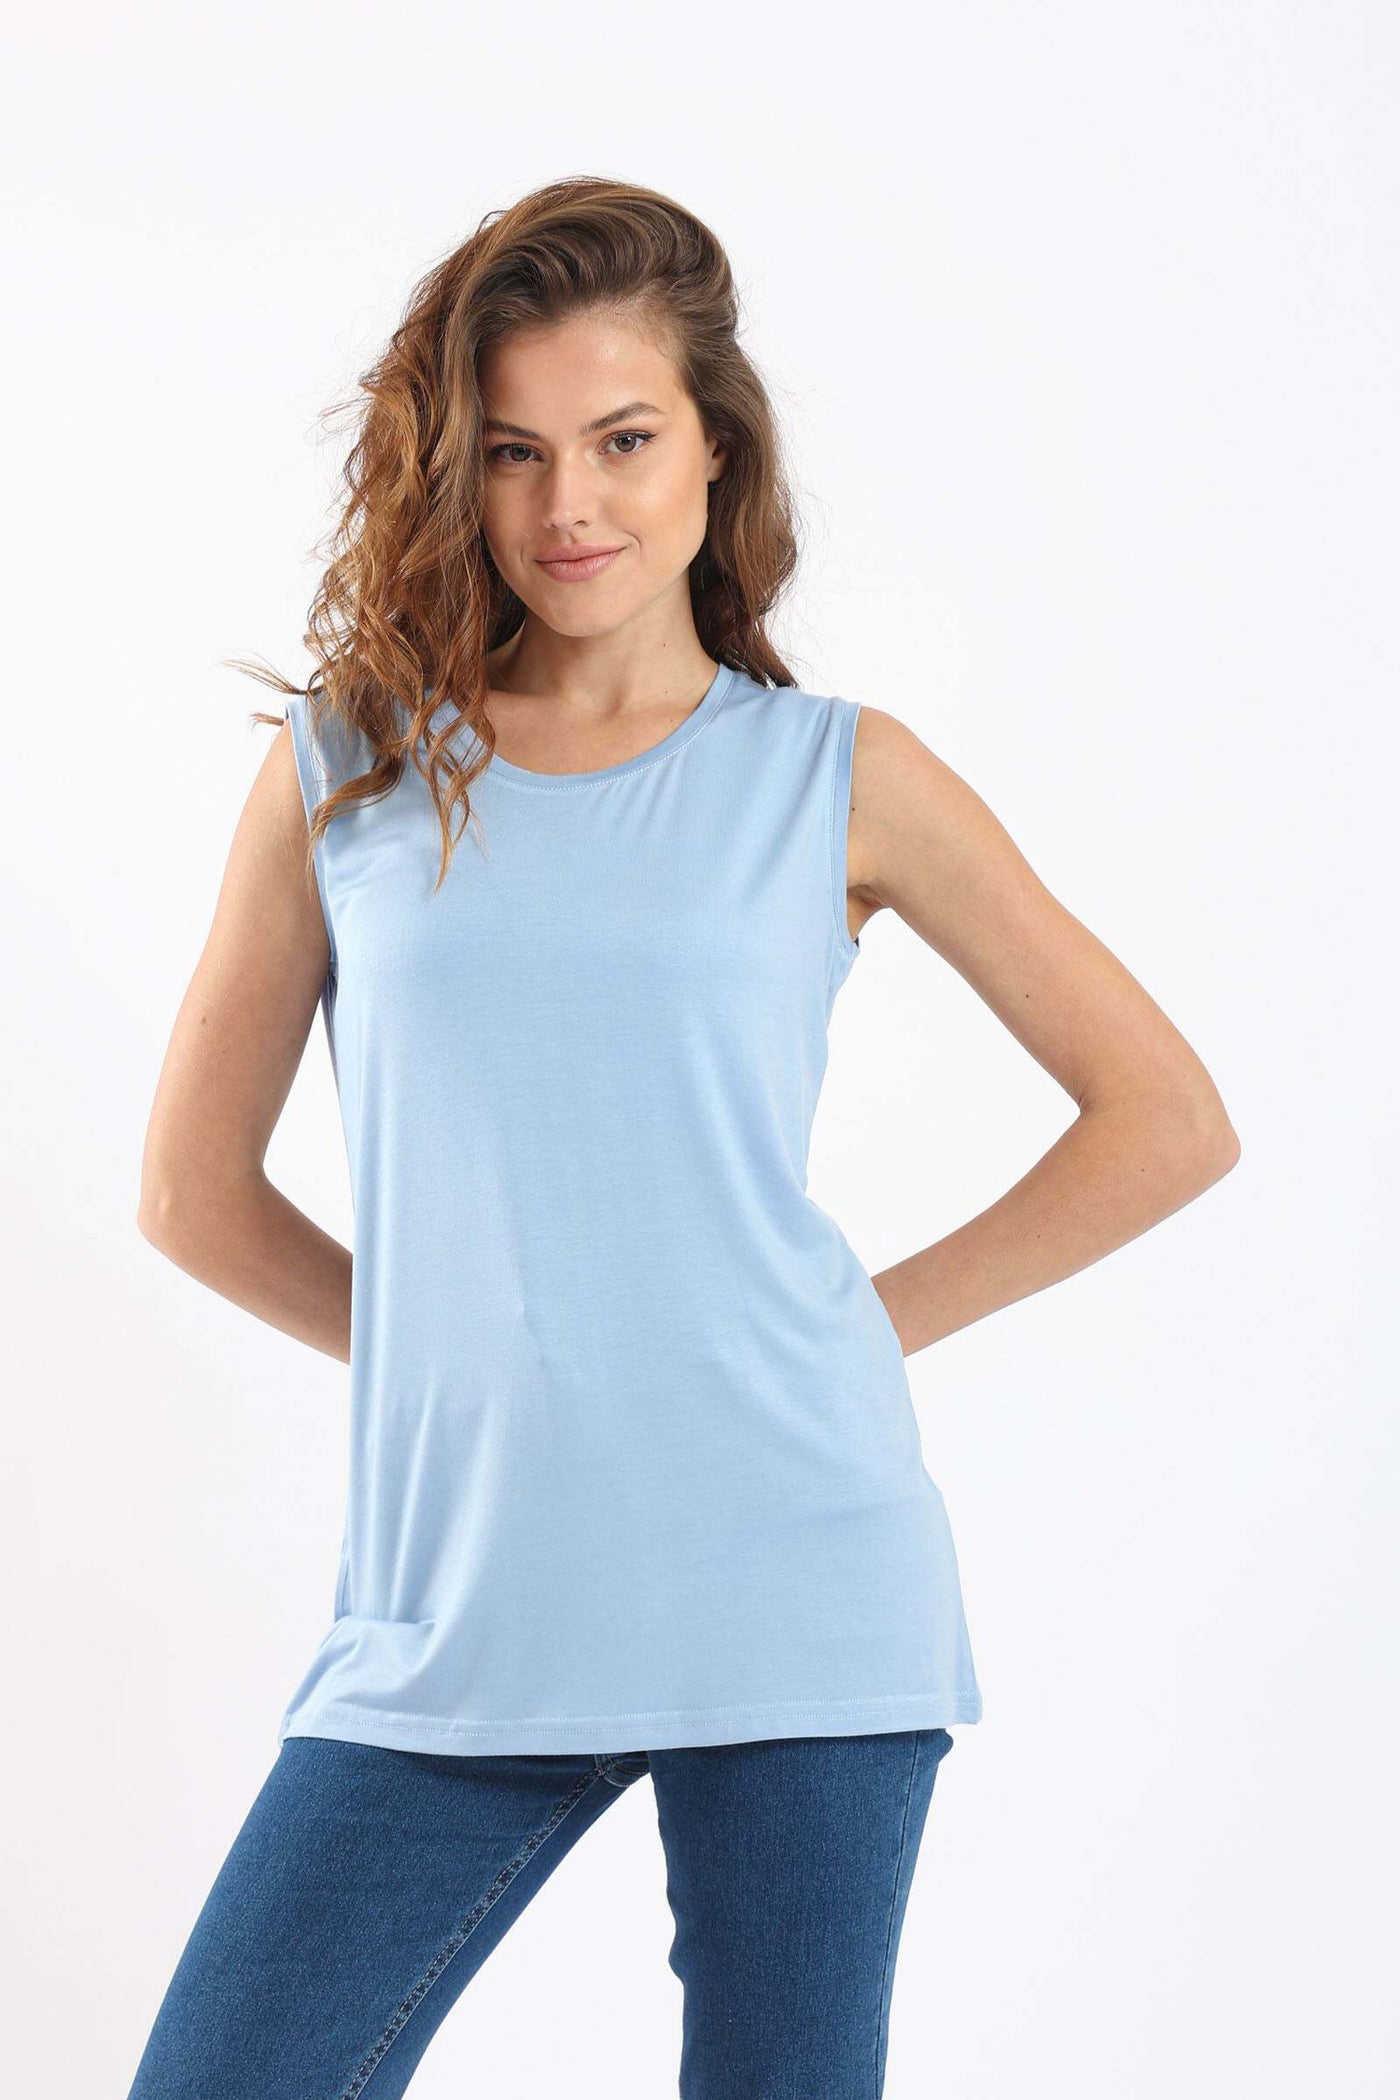 Top - Sleeveless - Solid